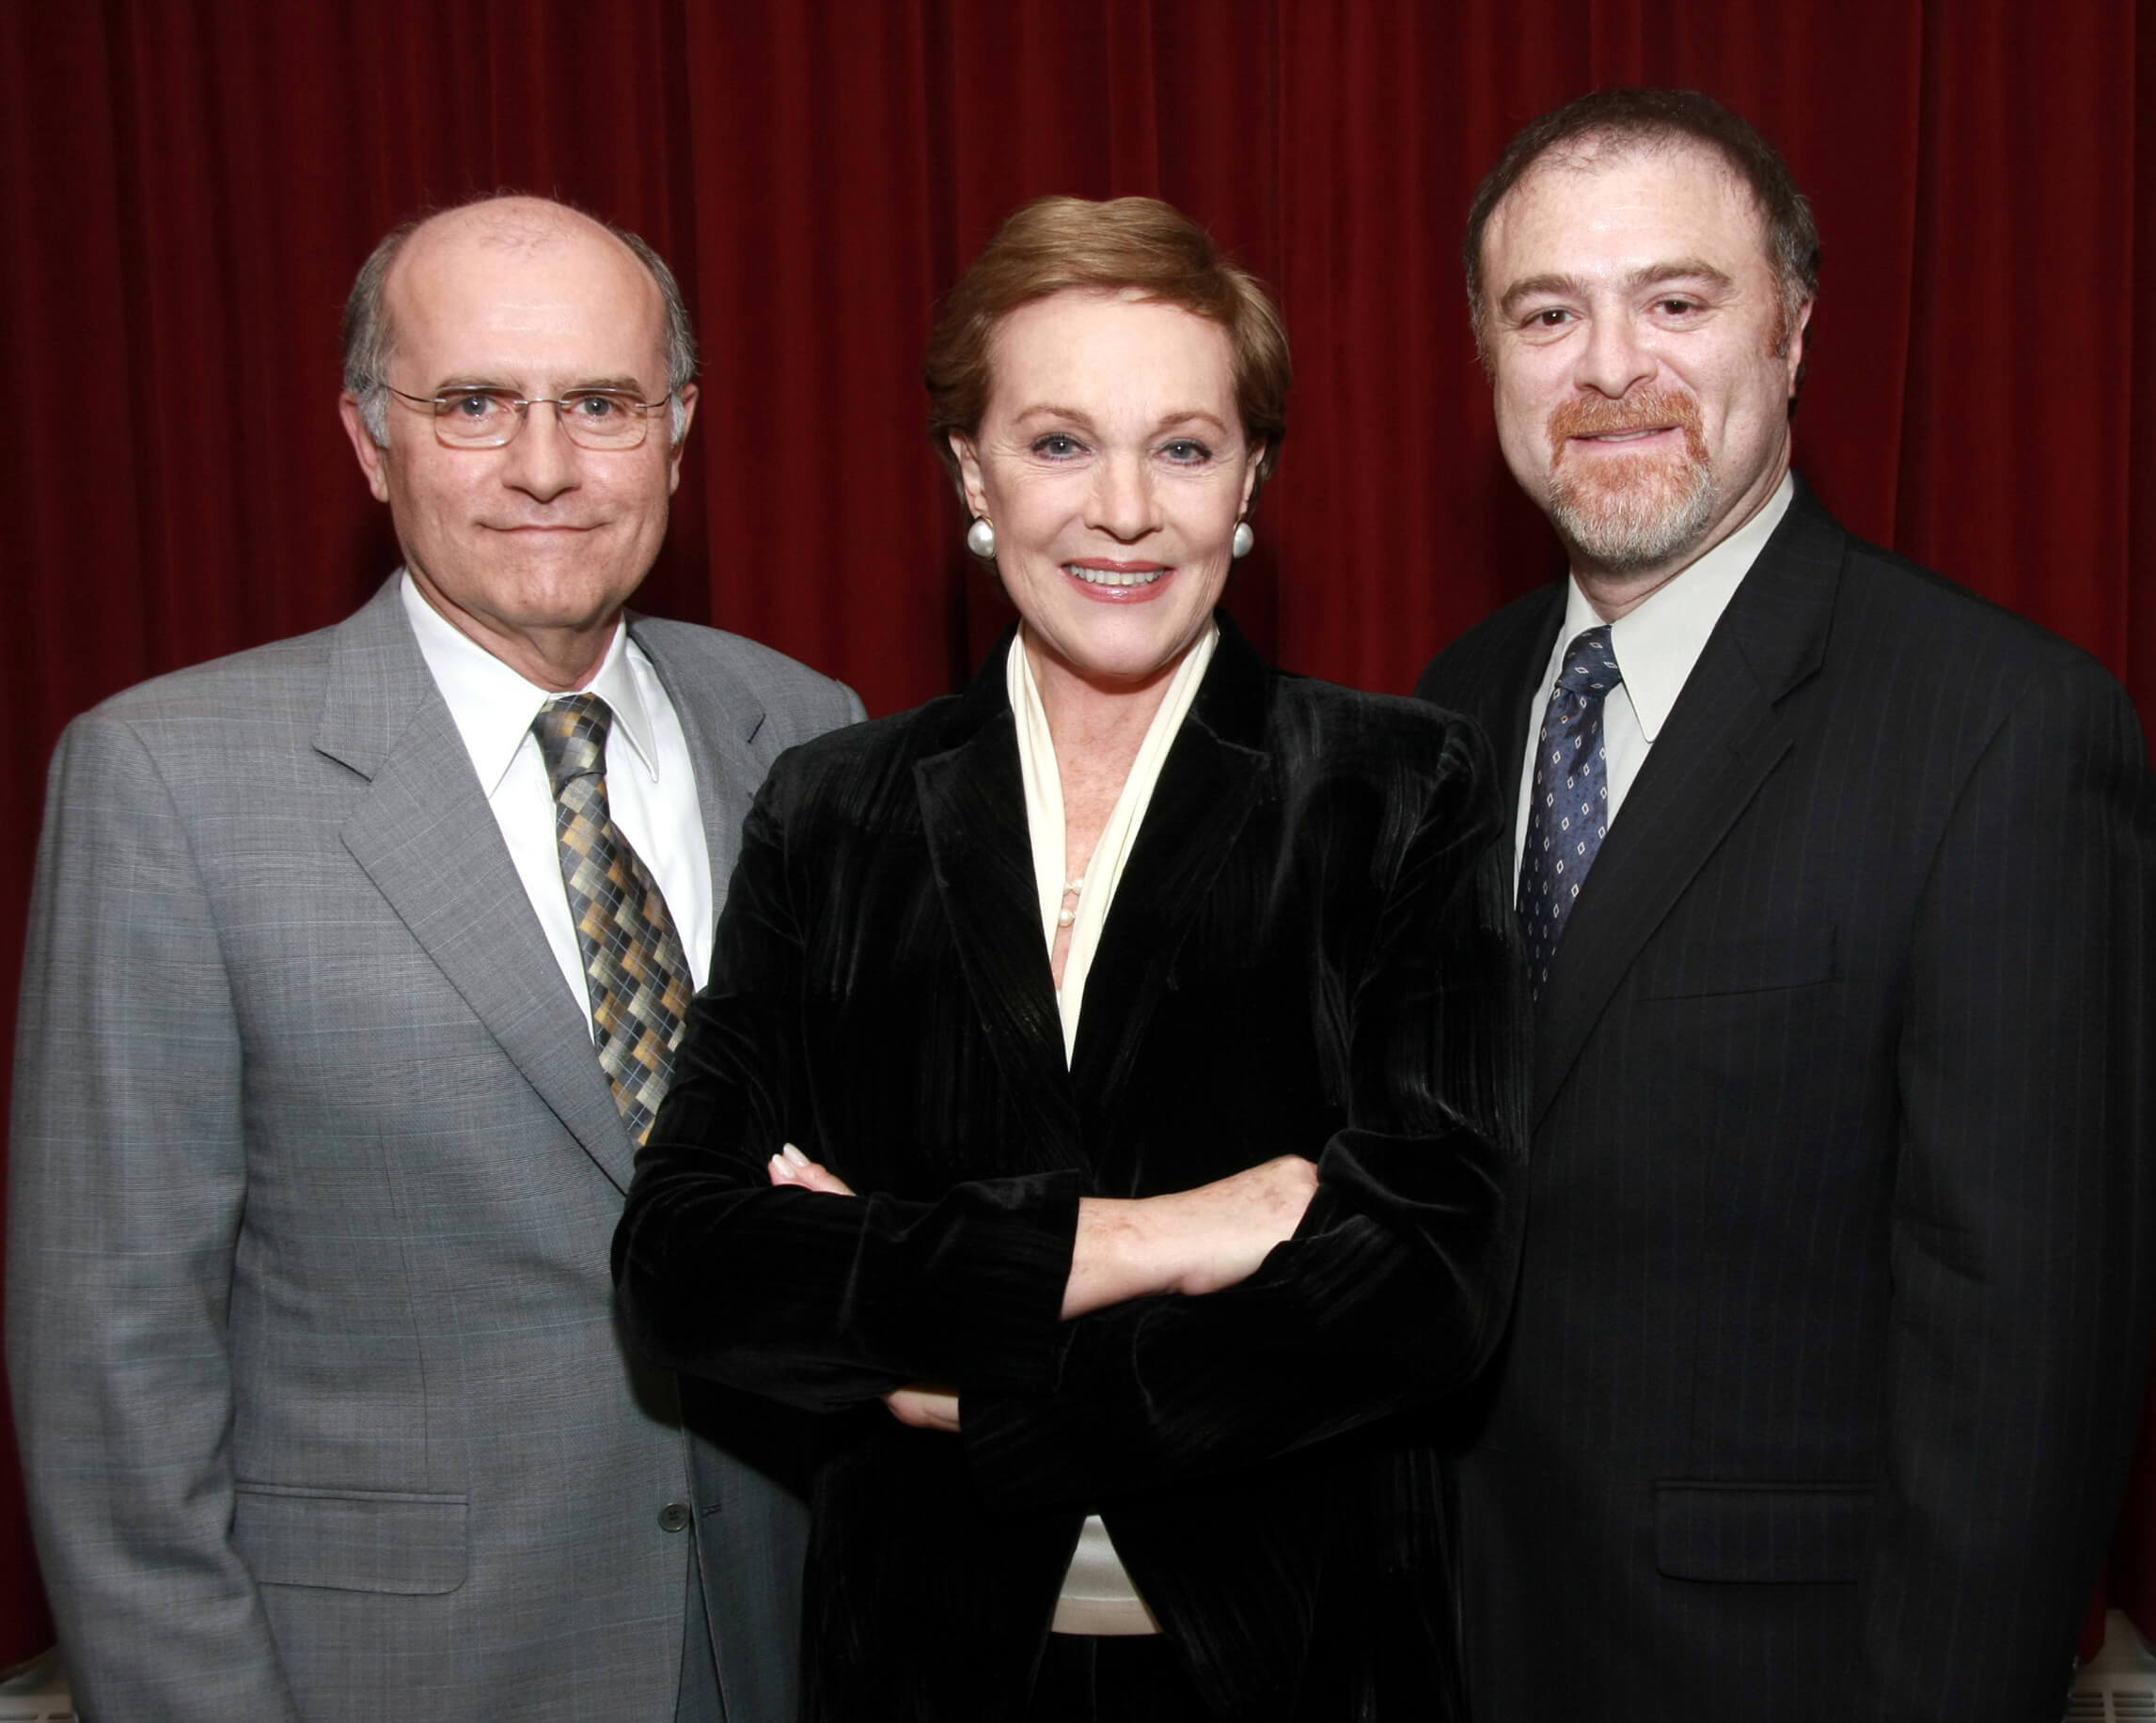 Julie Andrews with Drs. Zeitels and Hillman.